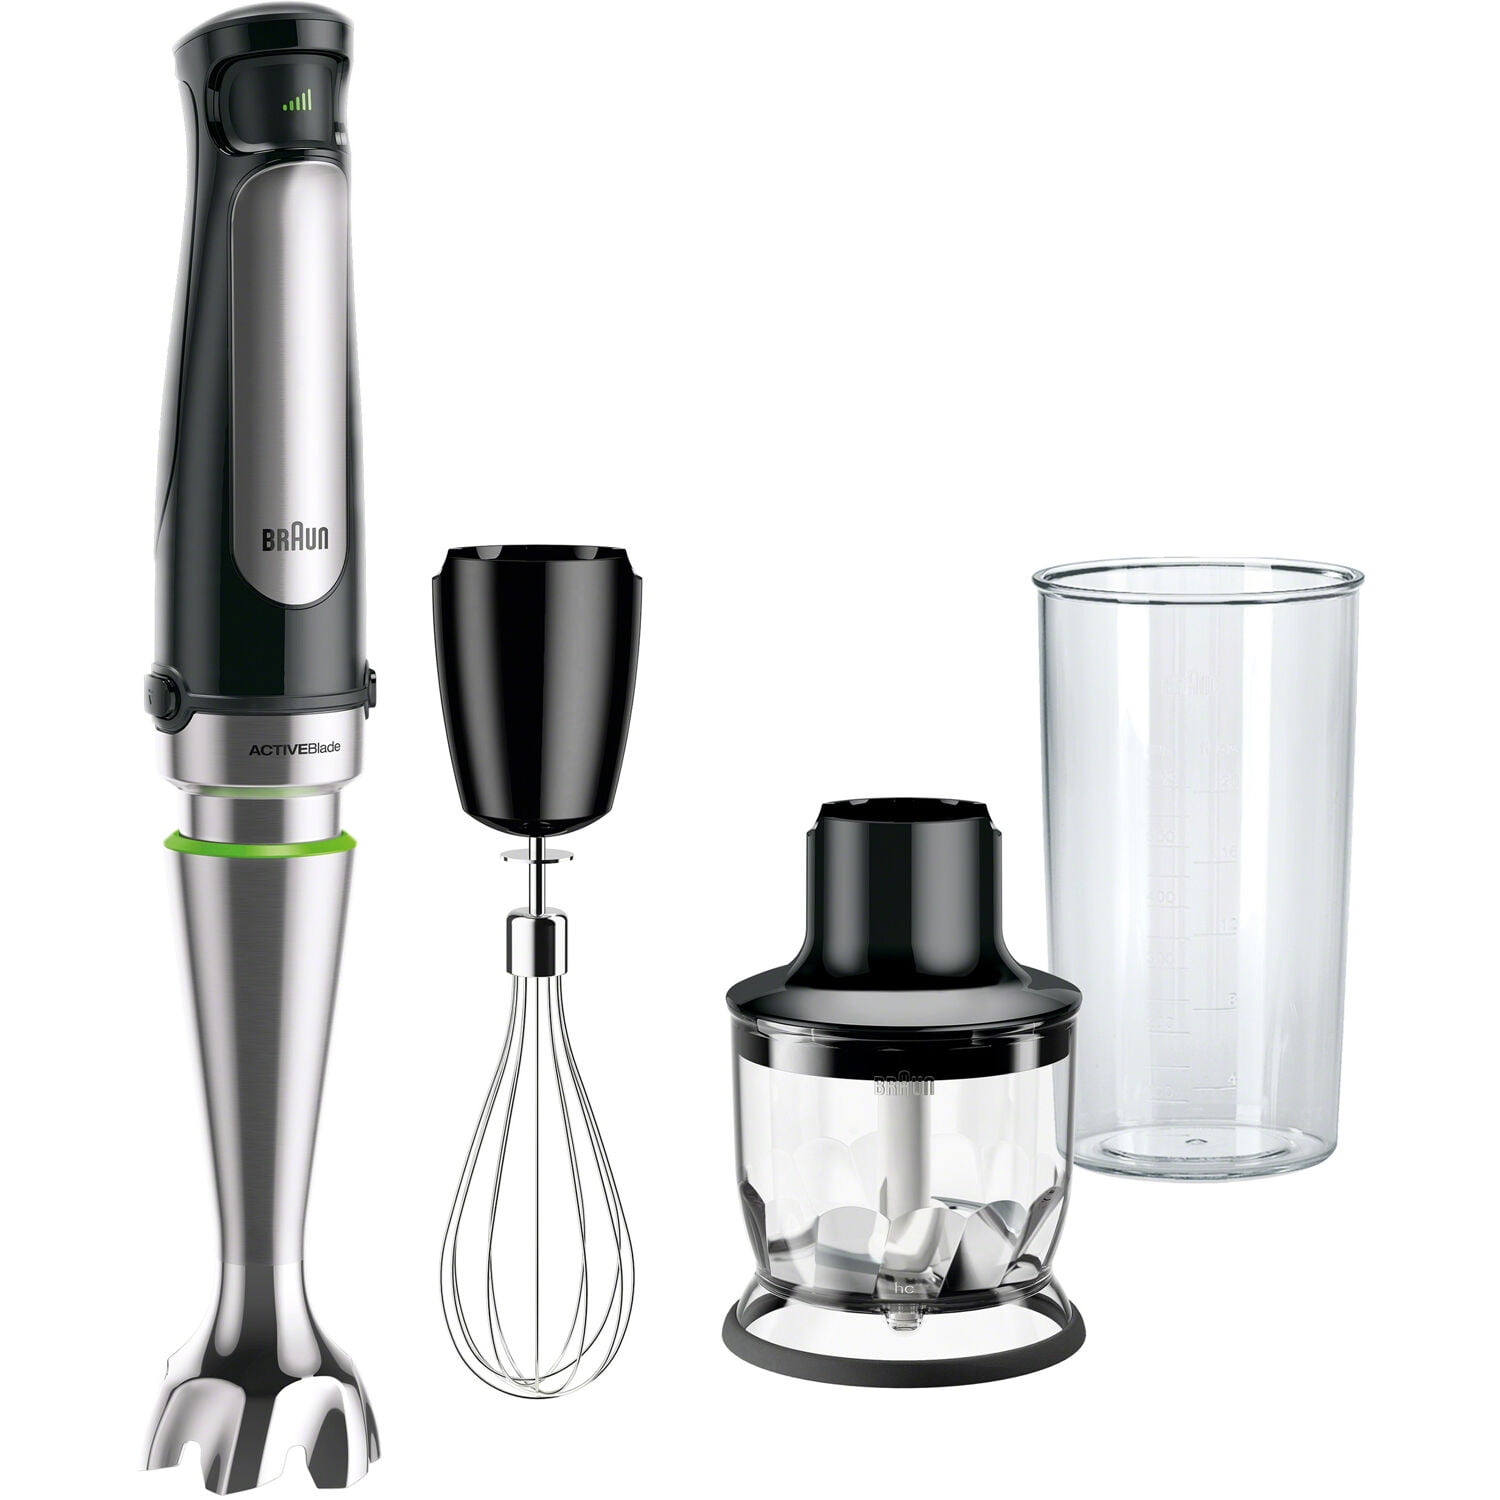 US STOCK Immersion Hand Blender Set with 6 Speeds Control 500 watts,Black 